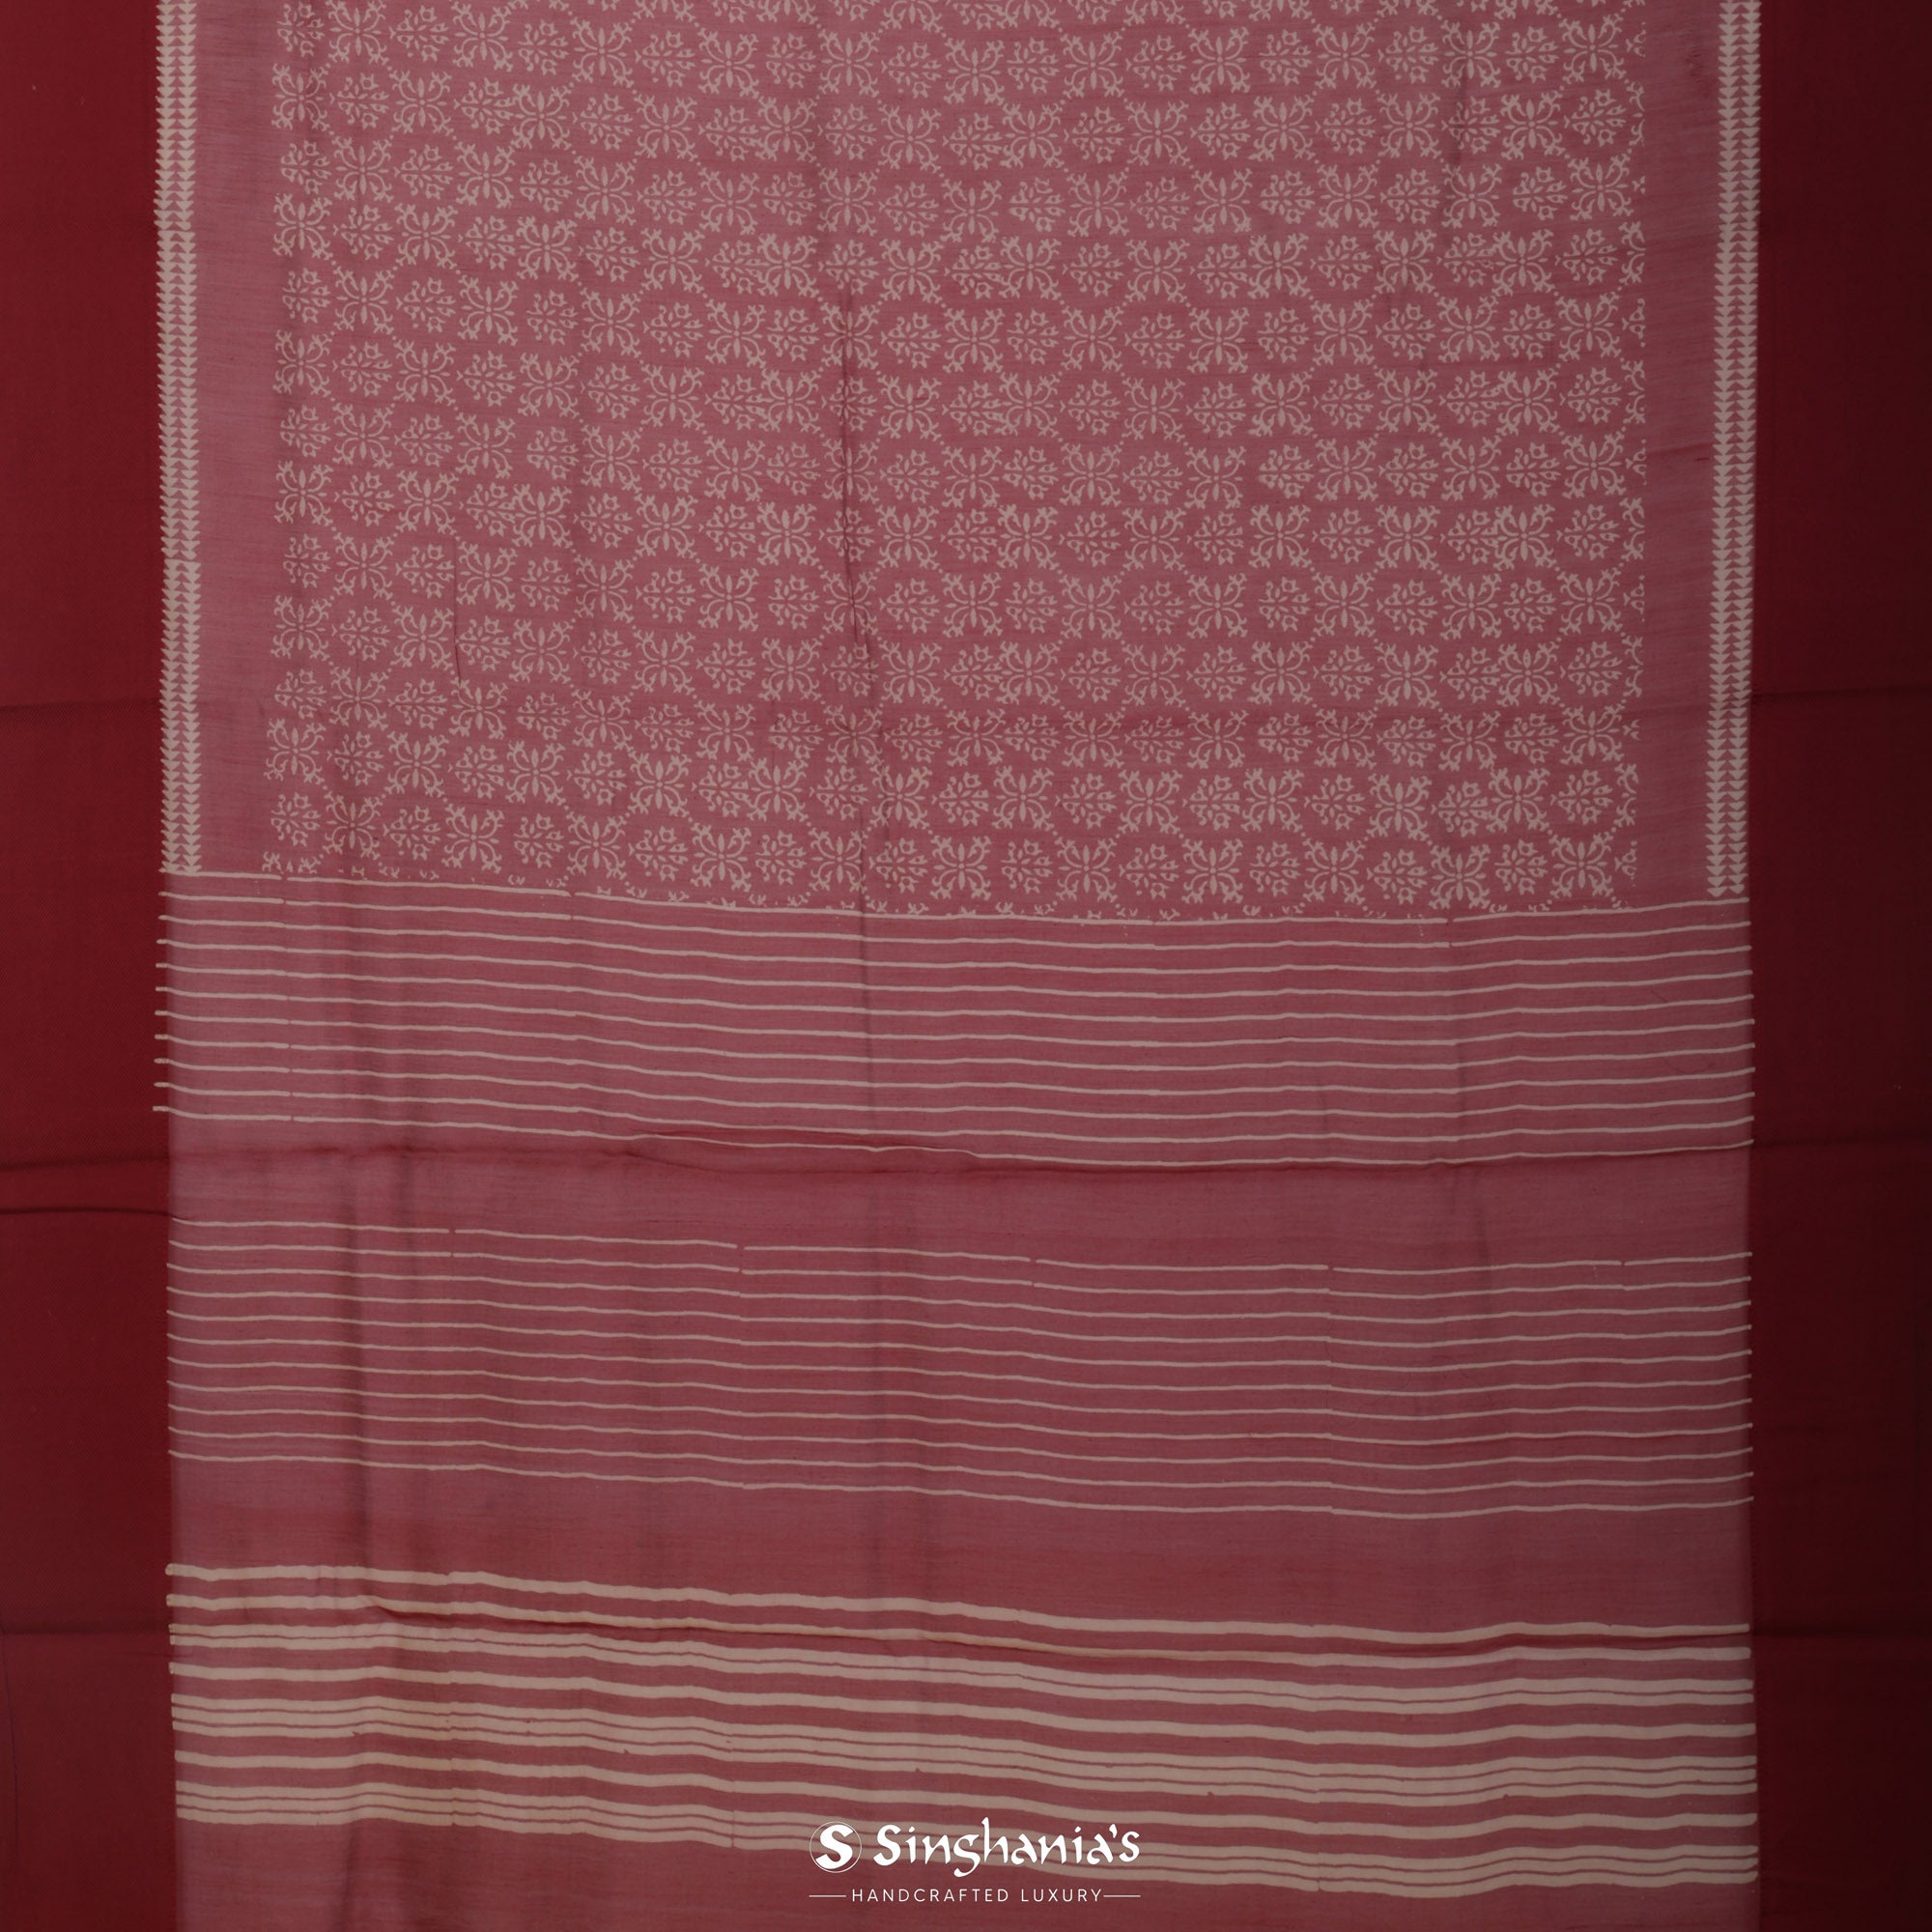 Cardinals Red Printed Chanderi Saree With Floral Jaal Pattern